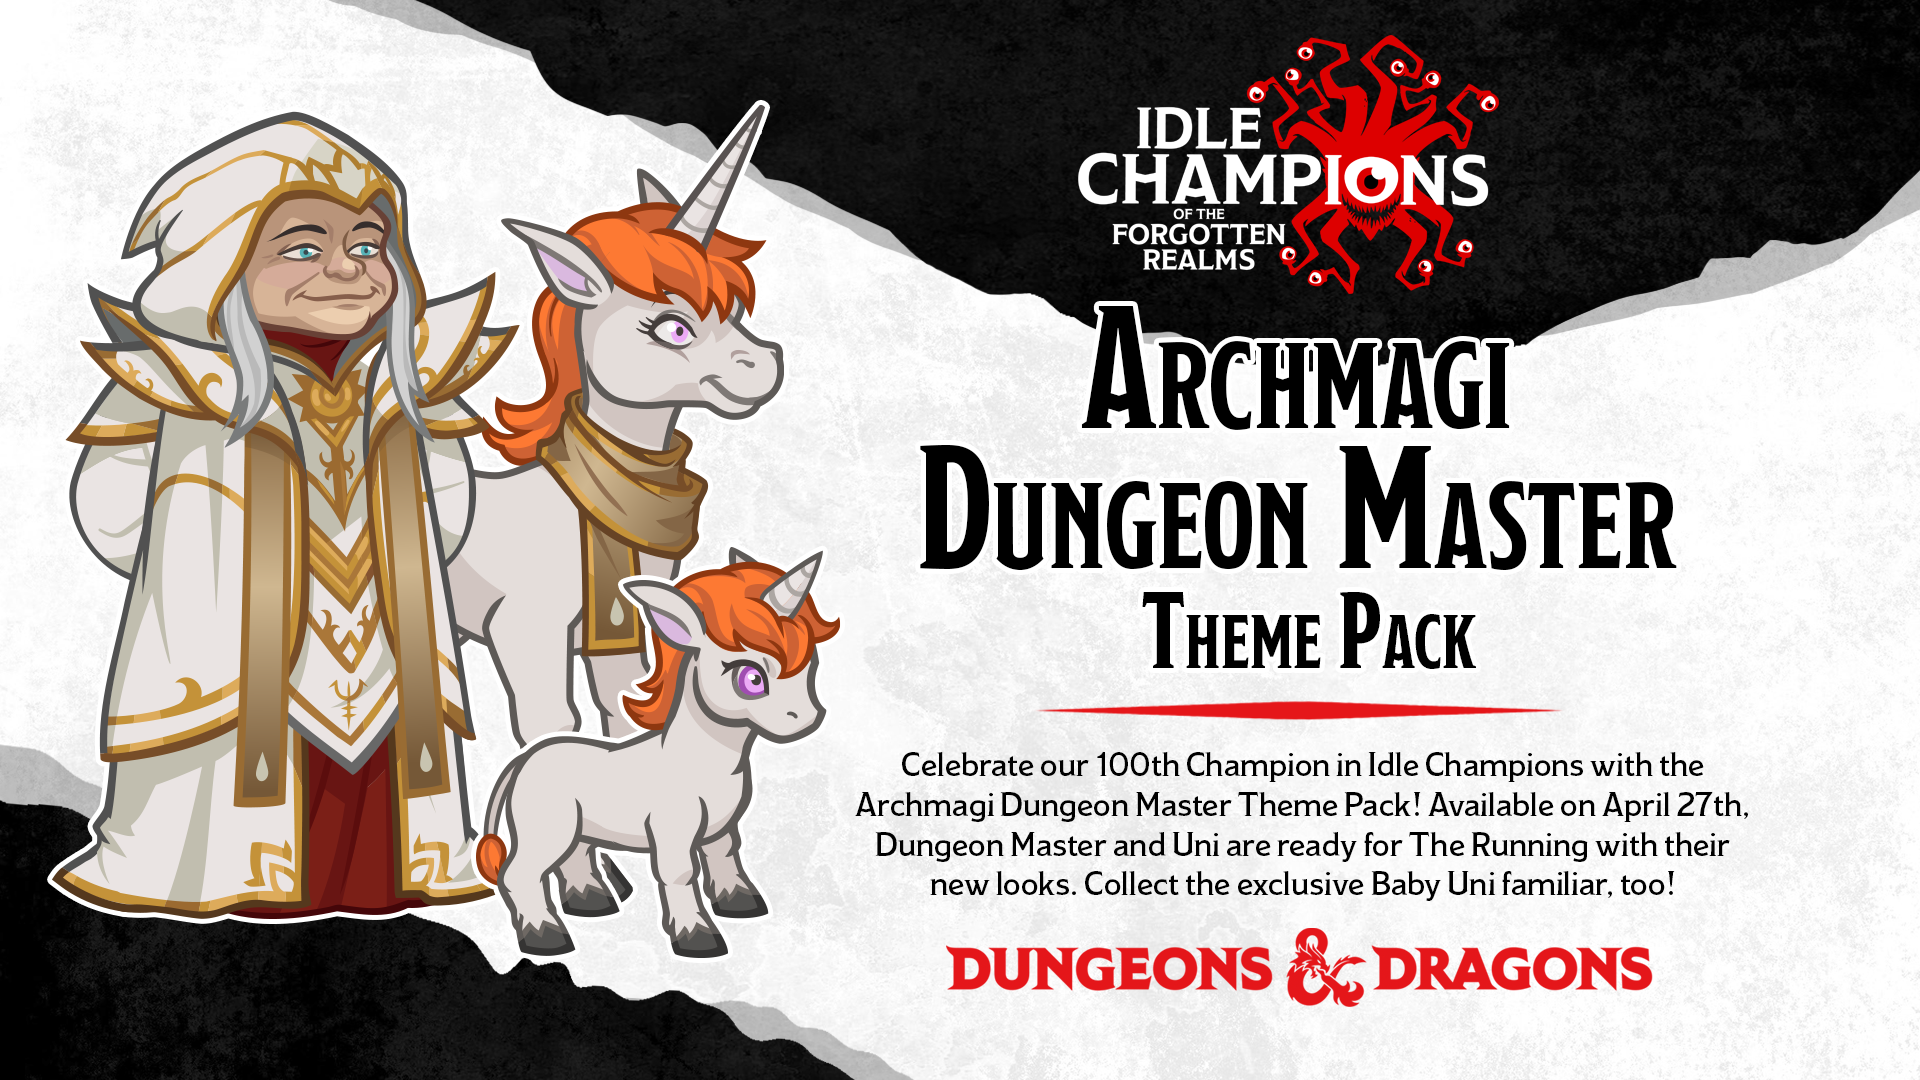 archimagidungeonmaster-marketing-graphic.png